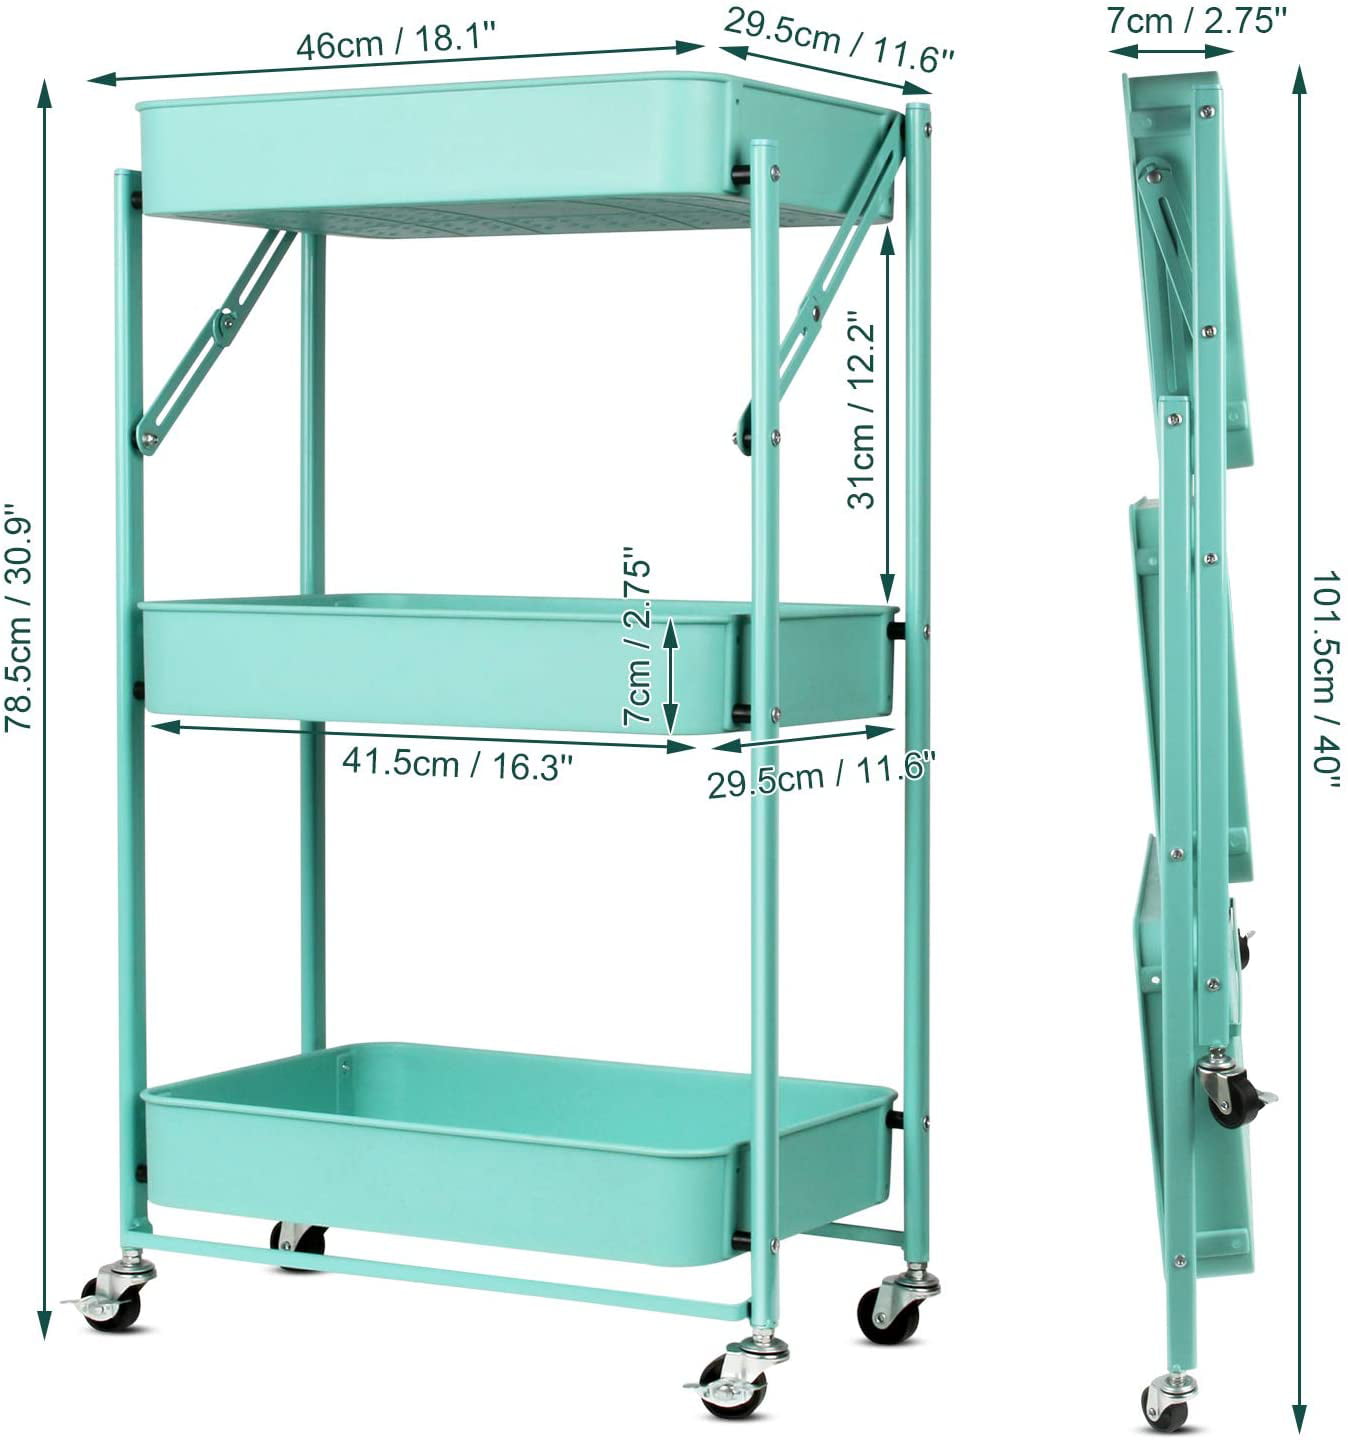 Todeco 3 Tier Foldable Plastic Rolling Storage Utility or Kitchen Cart，Folding Mobile Trolley Storage Organizer with Wheels for Office Bathroom Bedroom，Free Assembly，Green